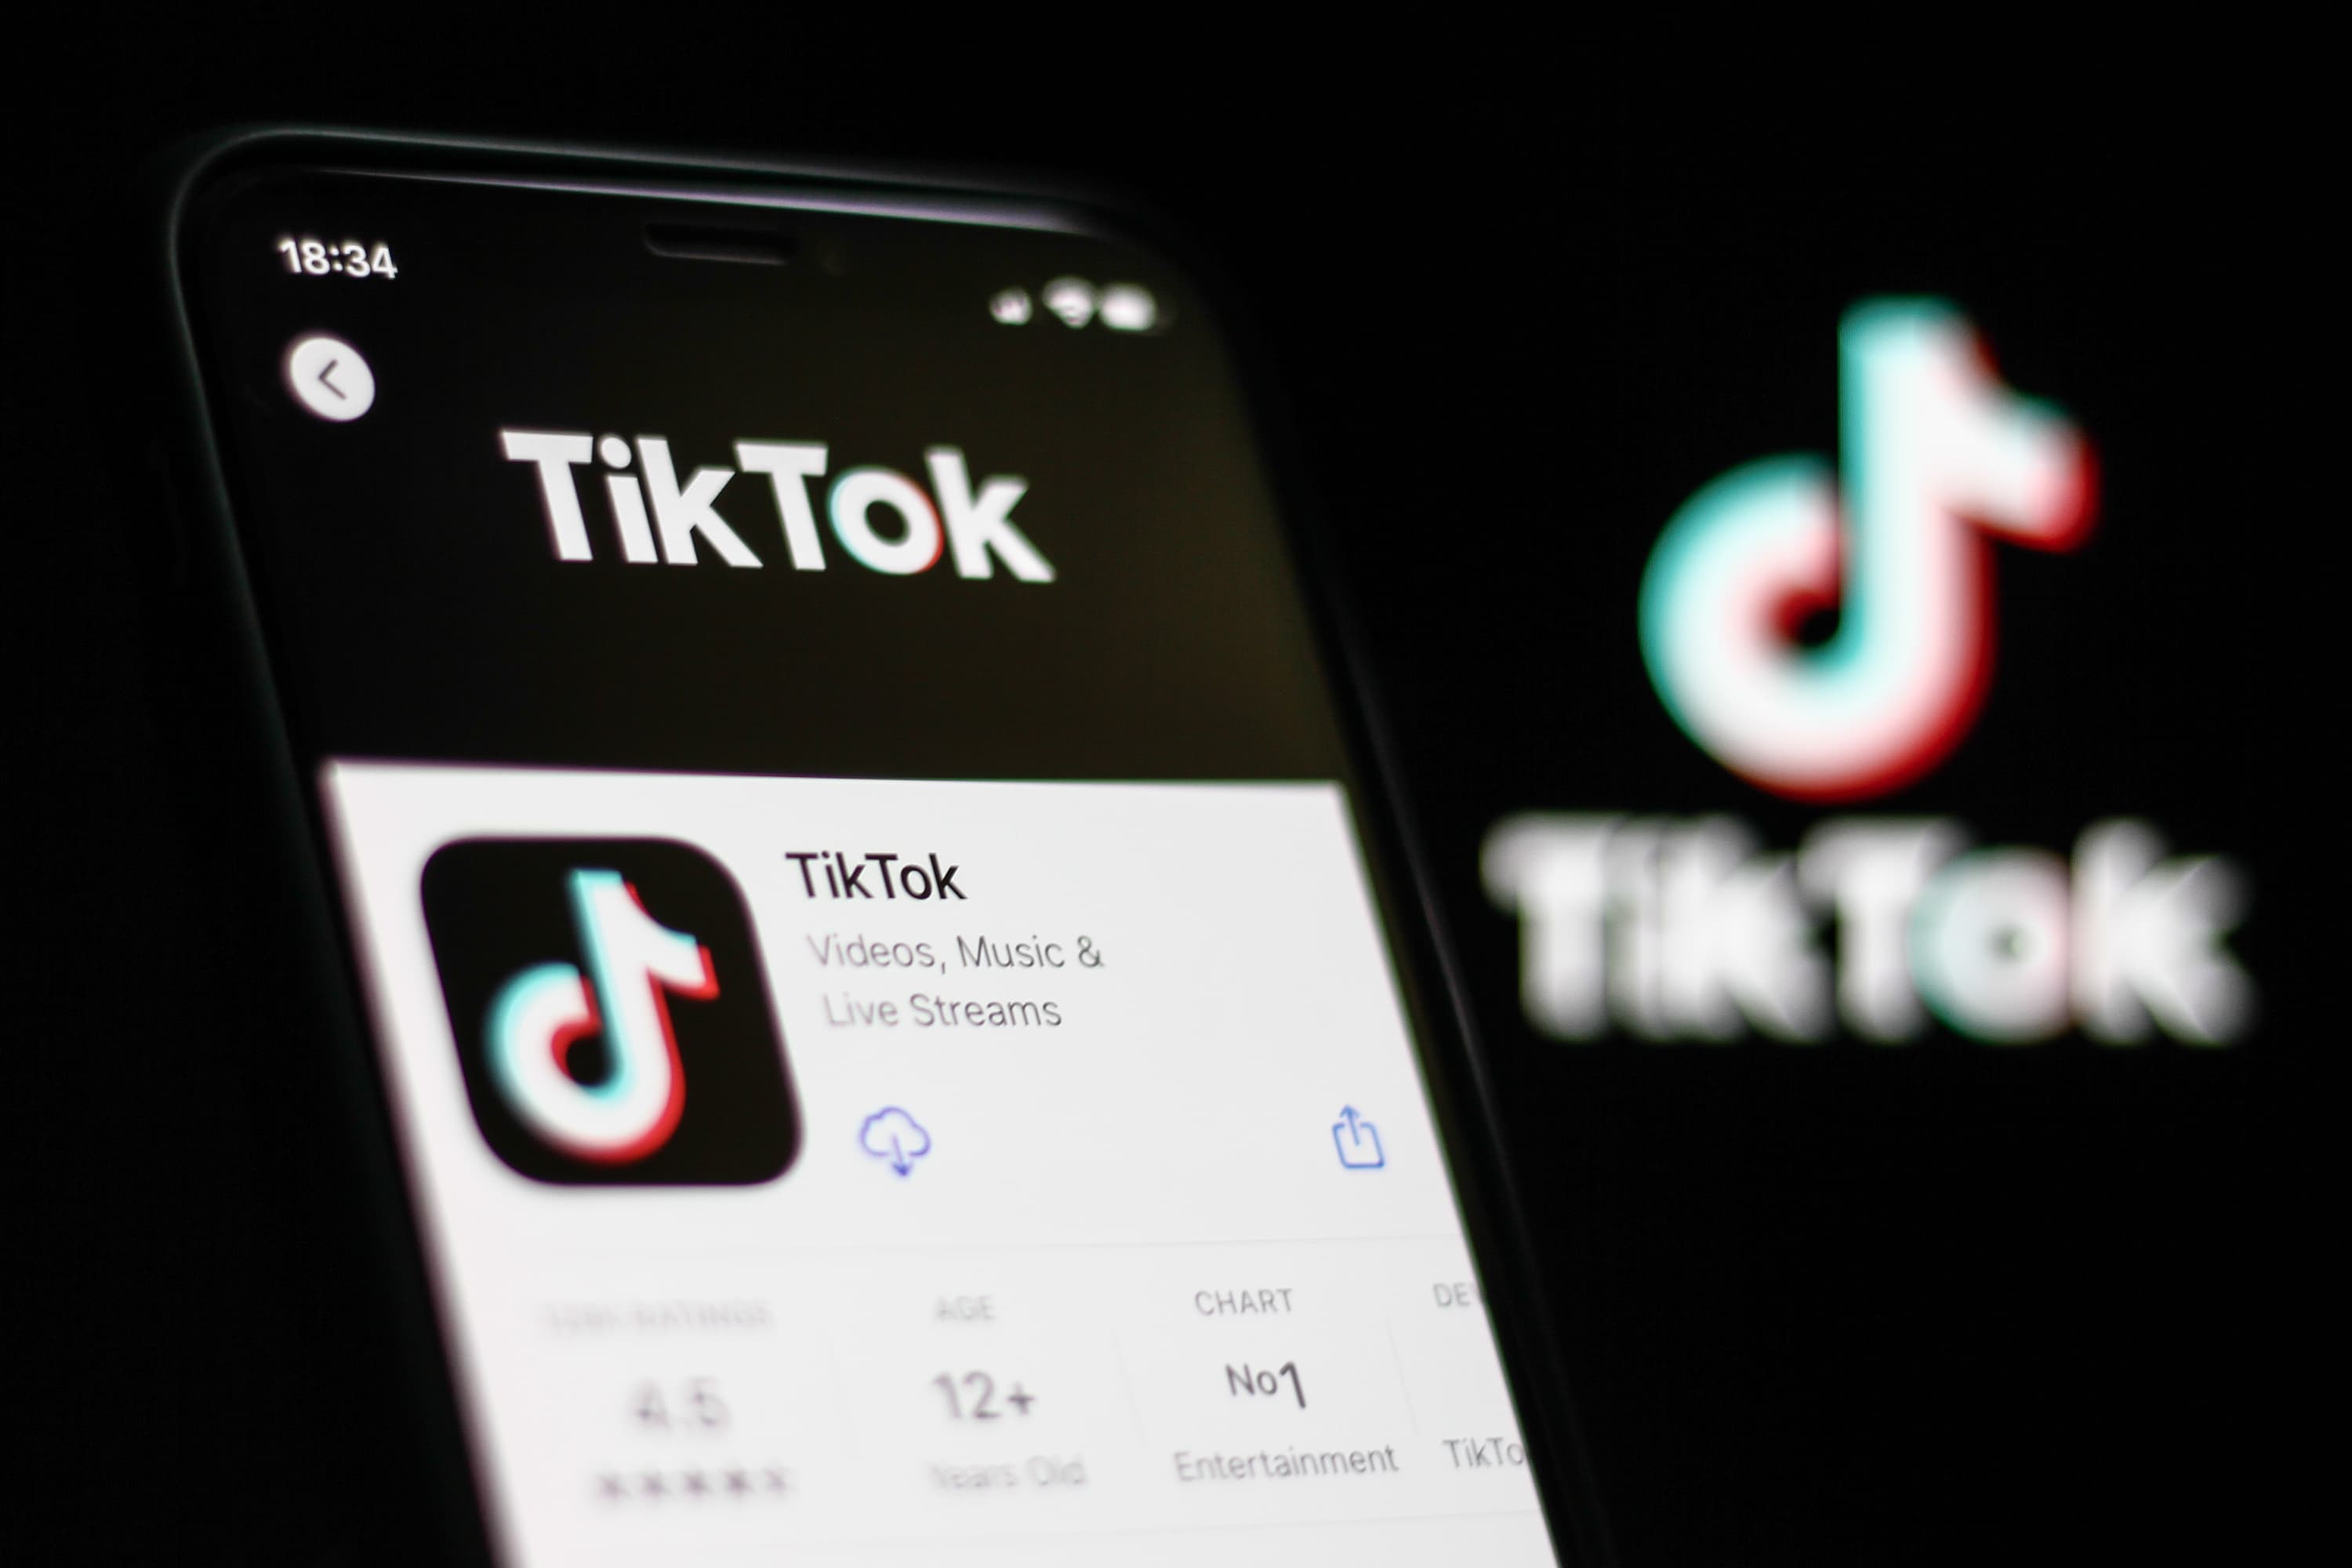 Promoting Your Ecommerce Brand and Selling on TikTok